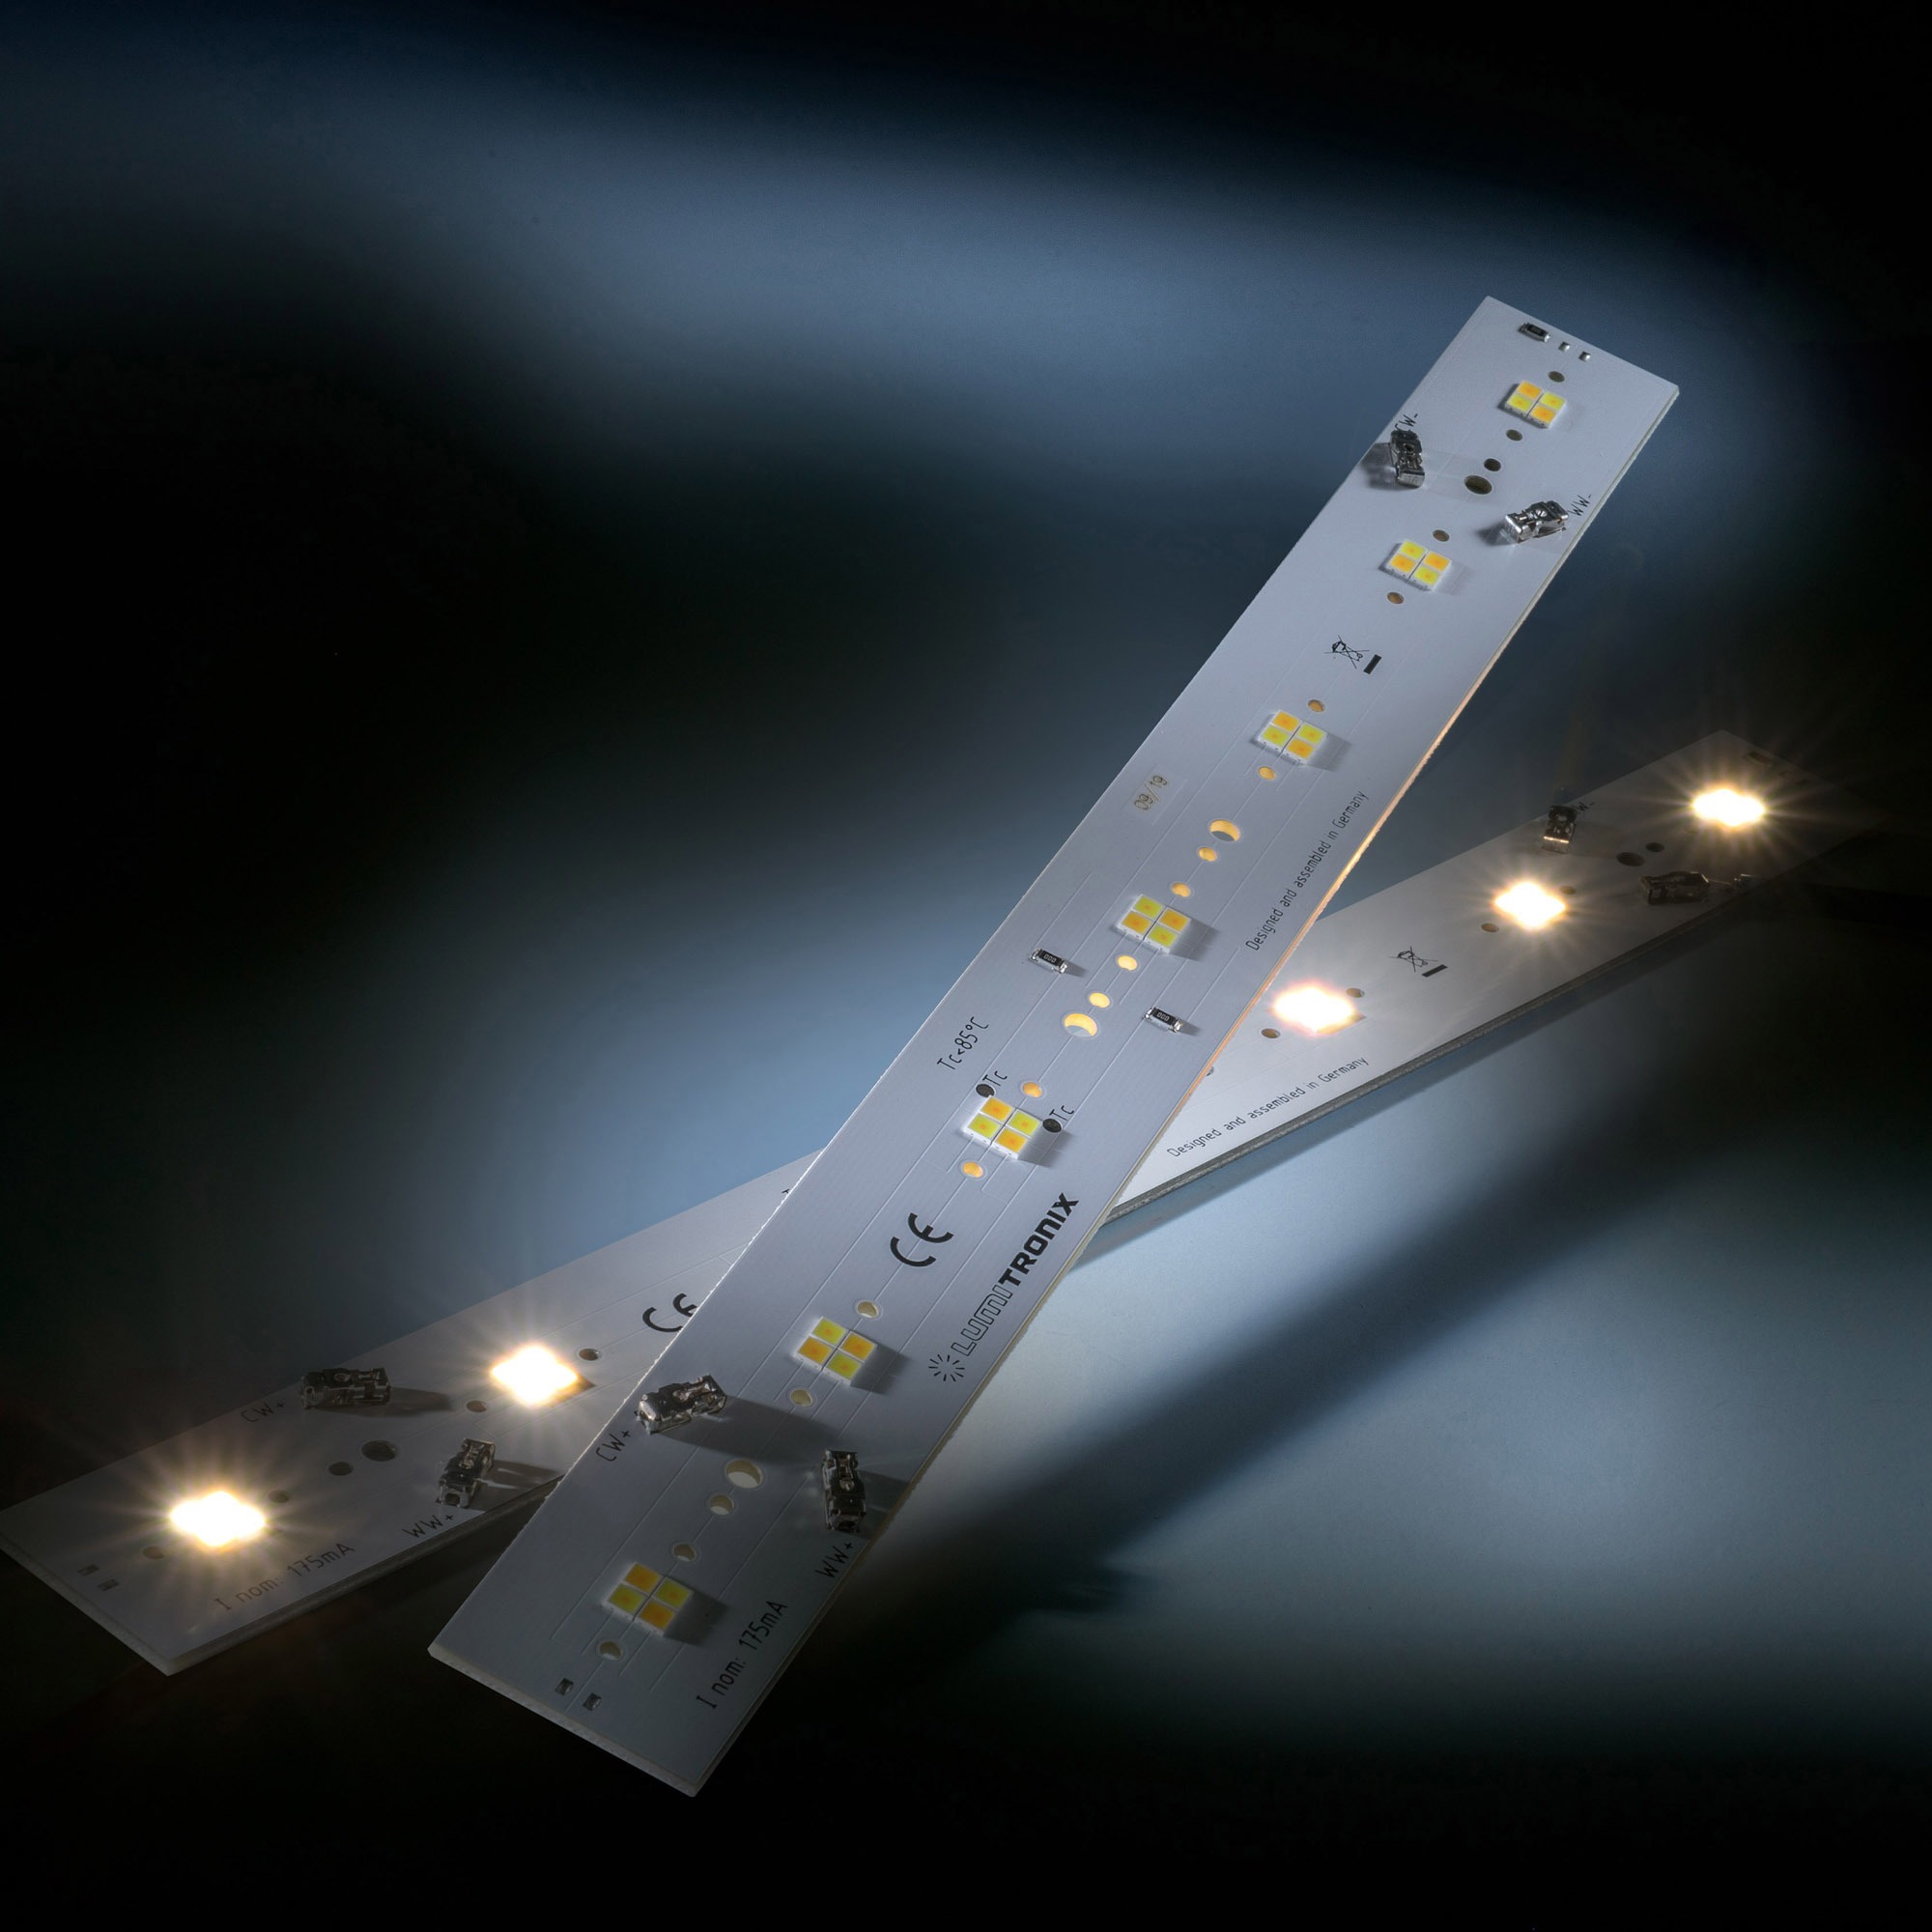 Daisy 28 Nichia LED Strip Tunable White 2700-4000K 595+625lm 175mA 20V 28 LEDs 28cm module (up to 1450lm/ft and 8W/ft)